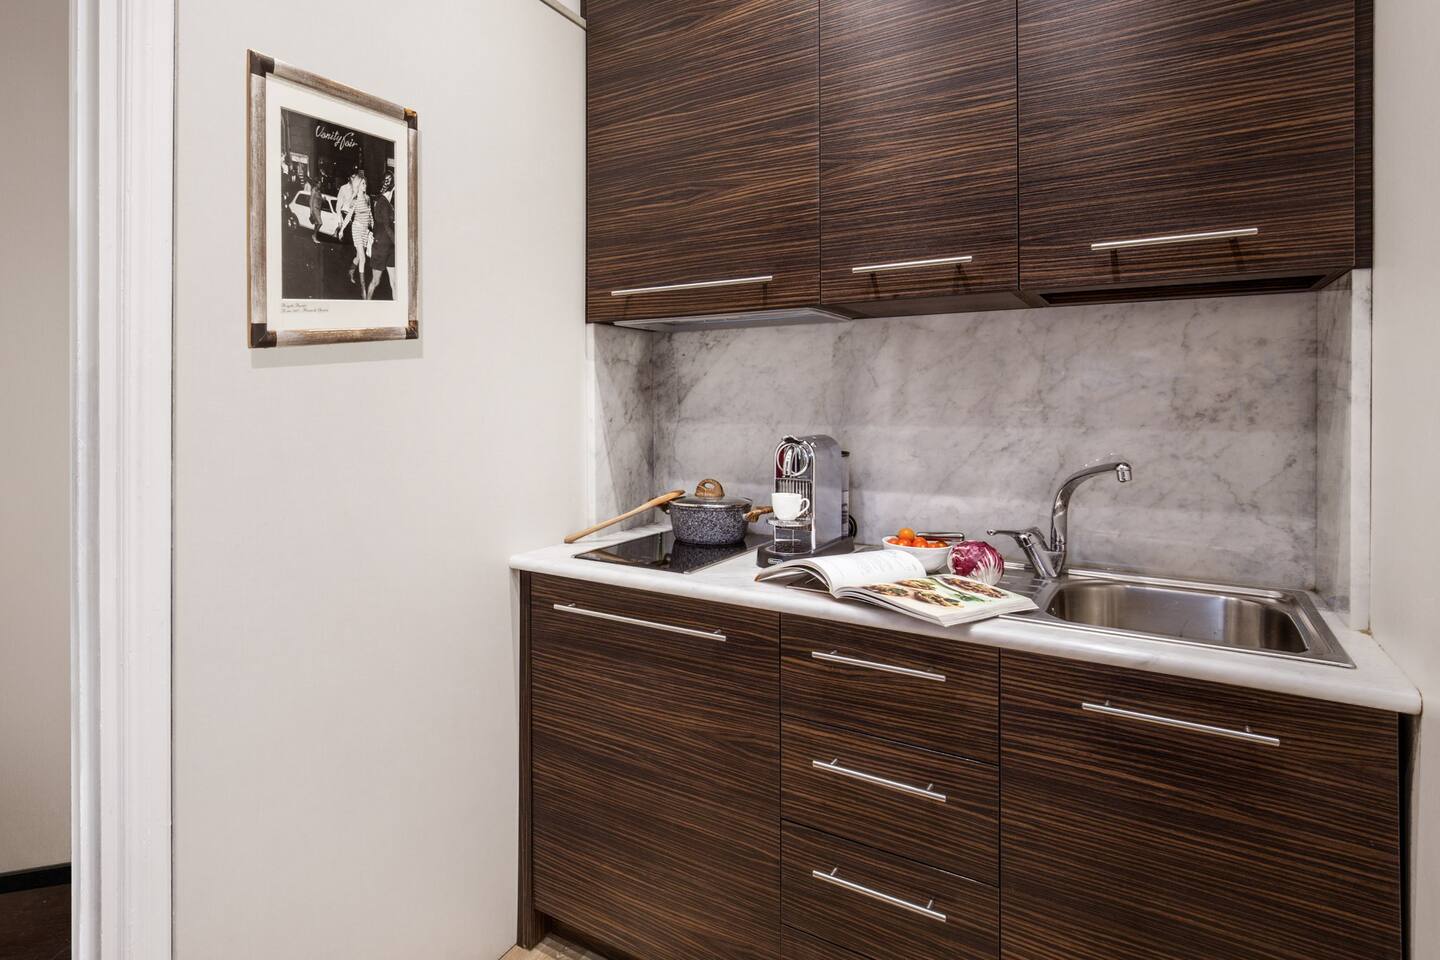 A compact kitchenette featuring a fridge, and sink.